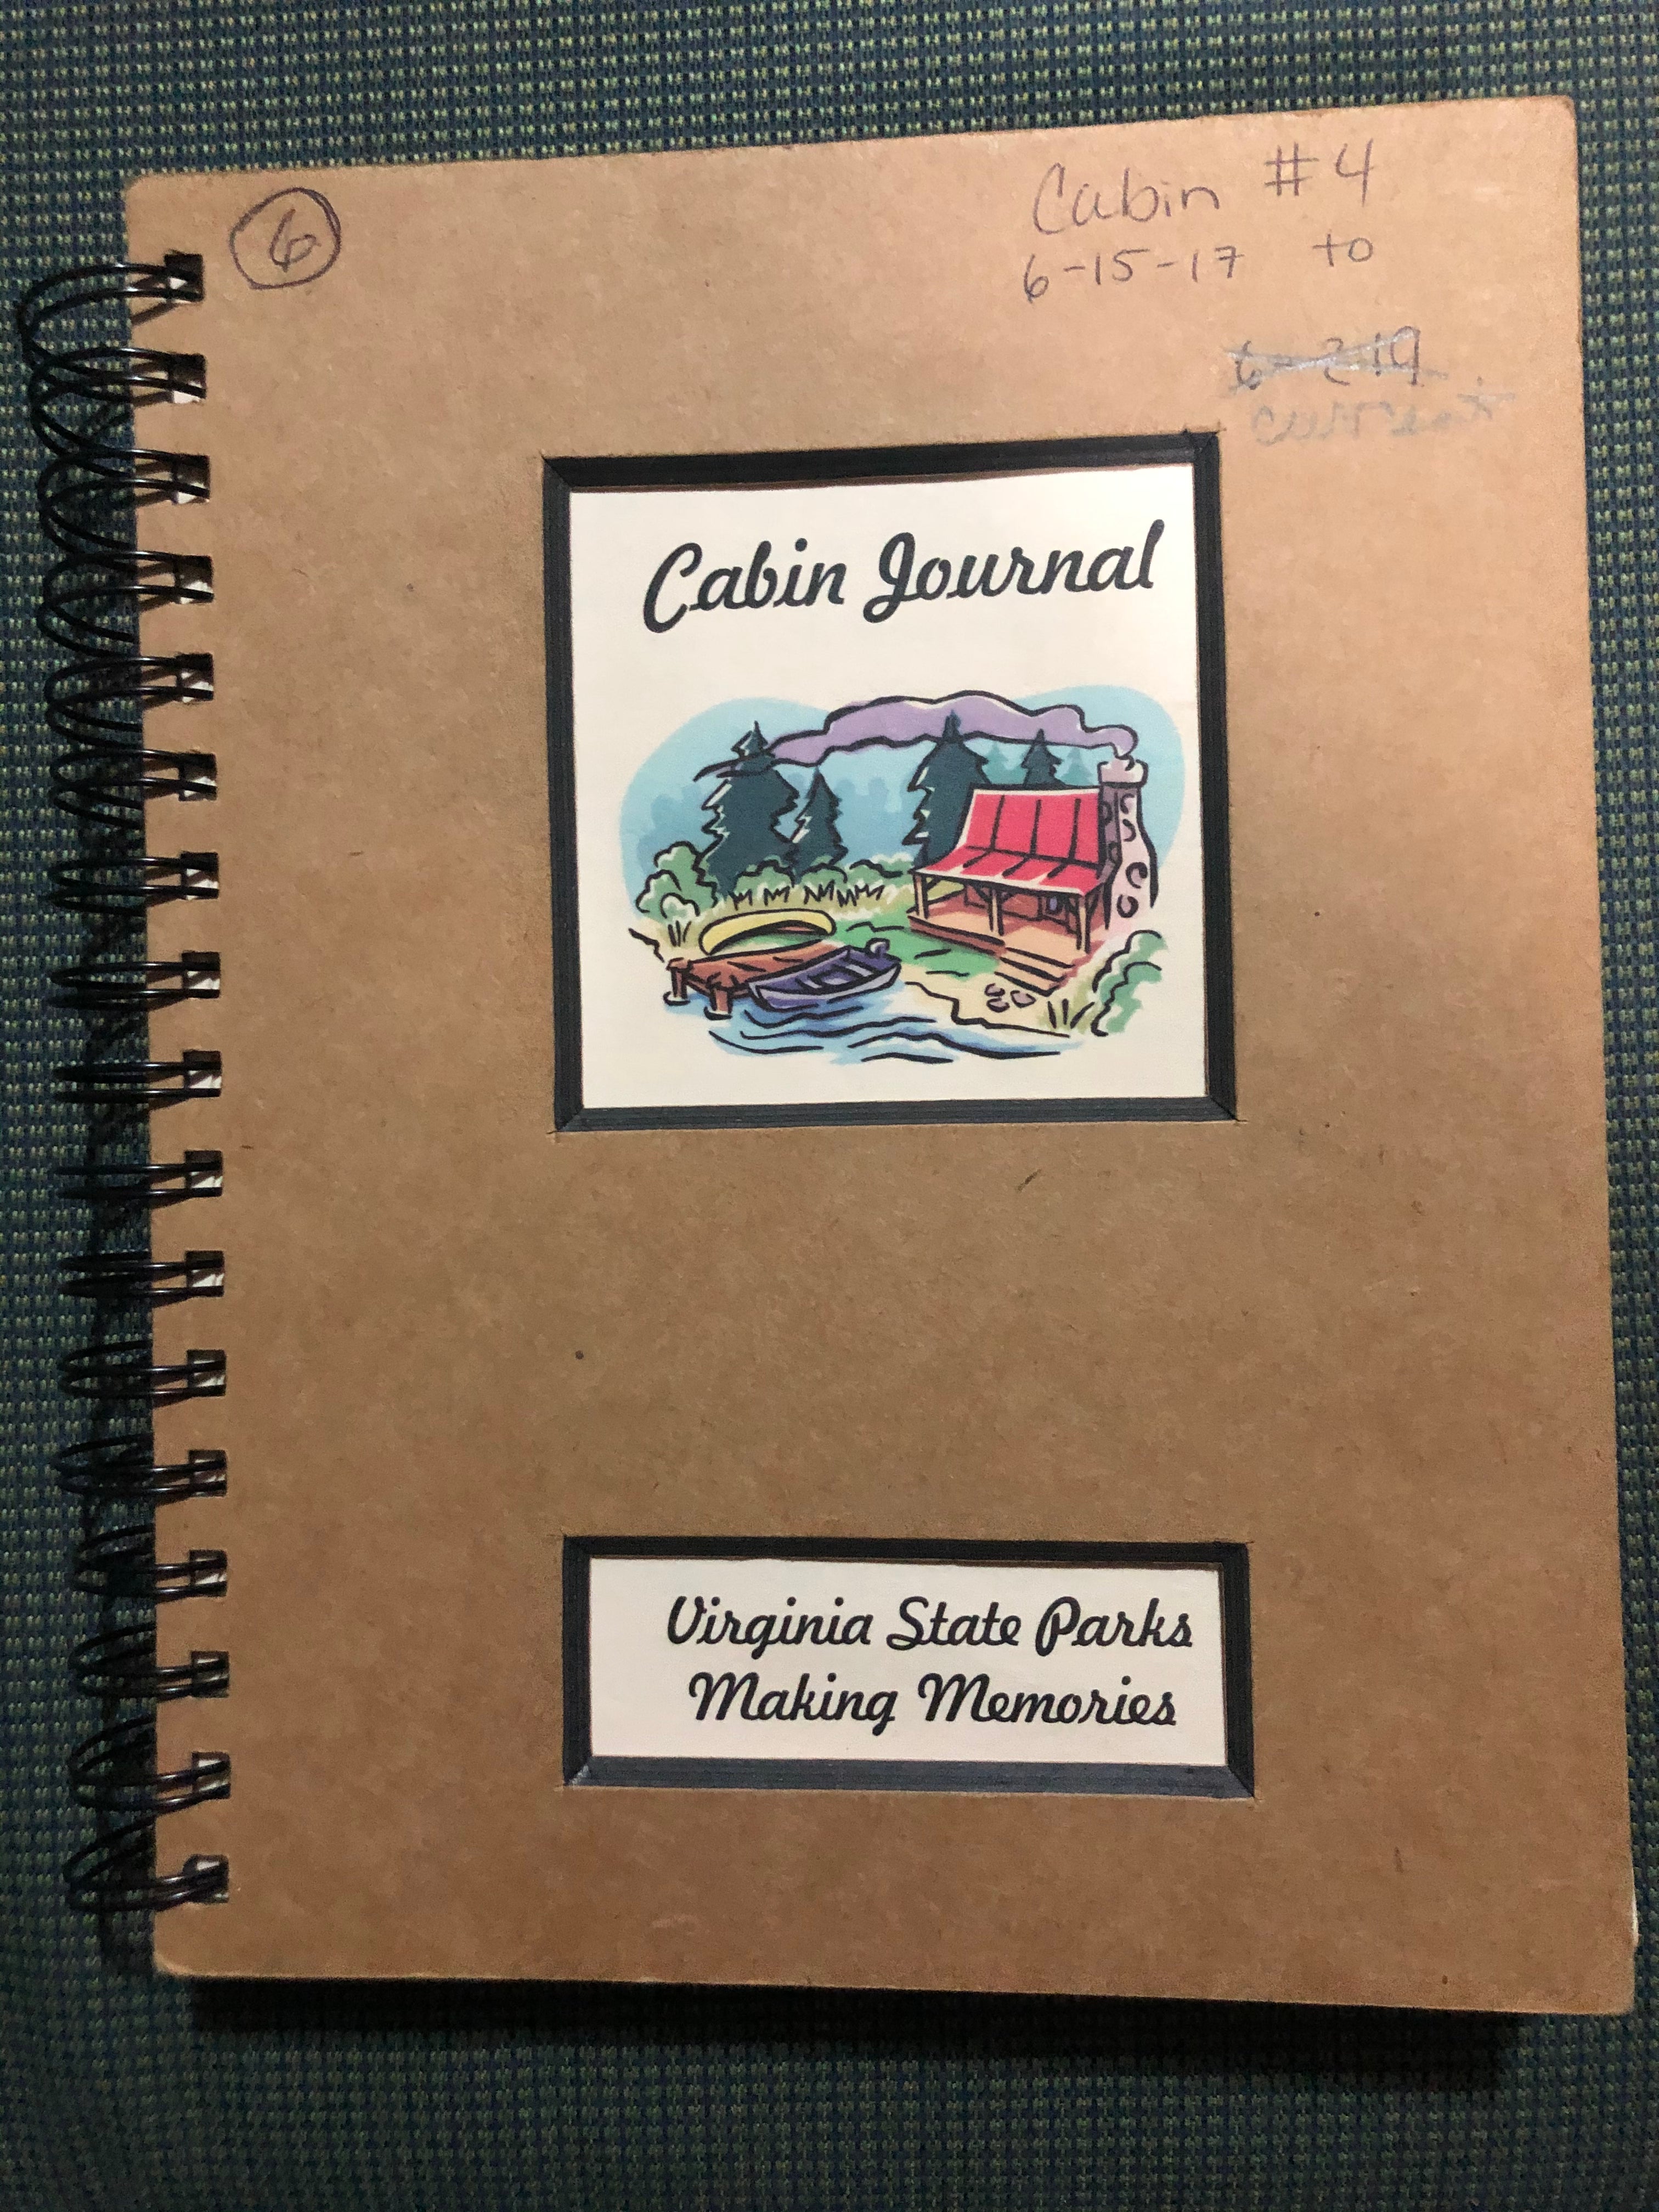 Check out the cabin journal for some funny, sad, & heartwarming stories of previous guests!